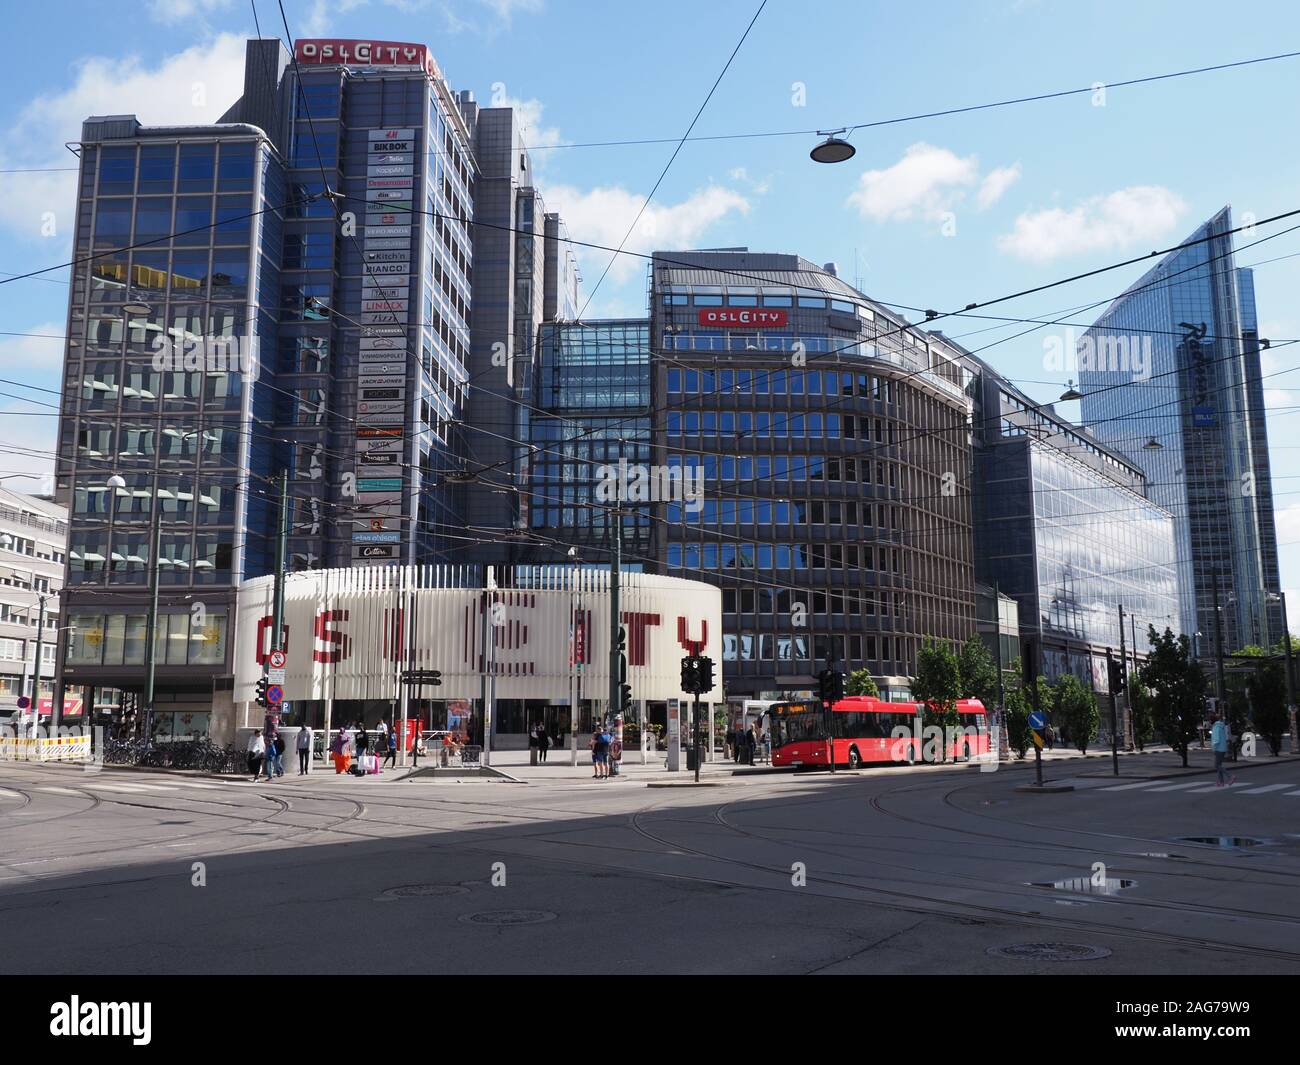 Oslo City Bus High Resolution Stock Photography and Images - Alamy